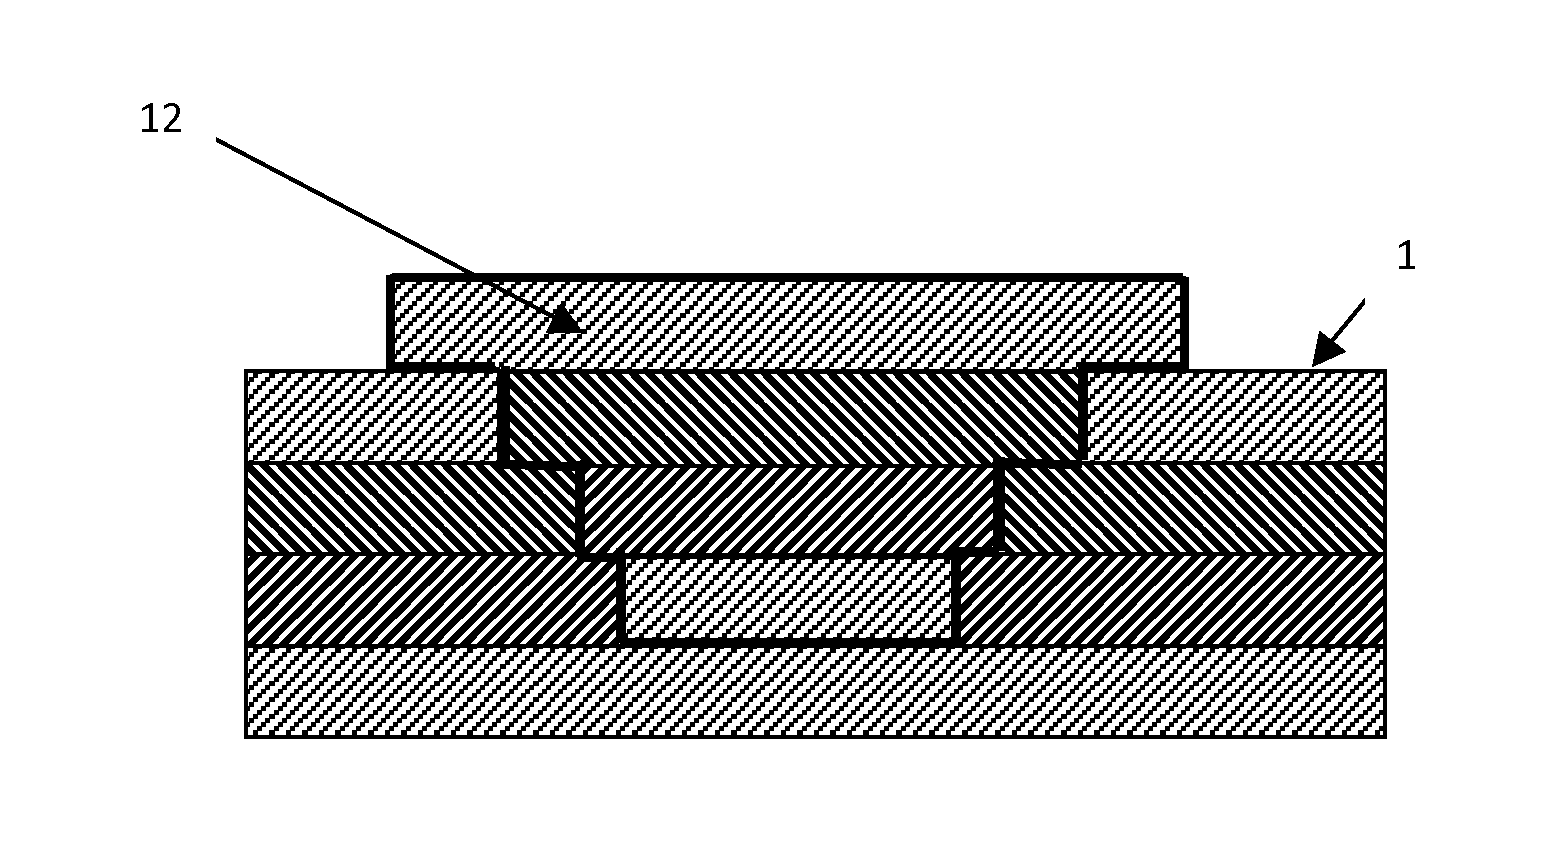 Method for repairing a wall consisting of a plurality of layers